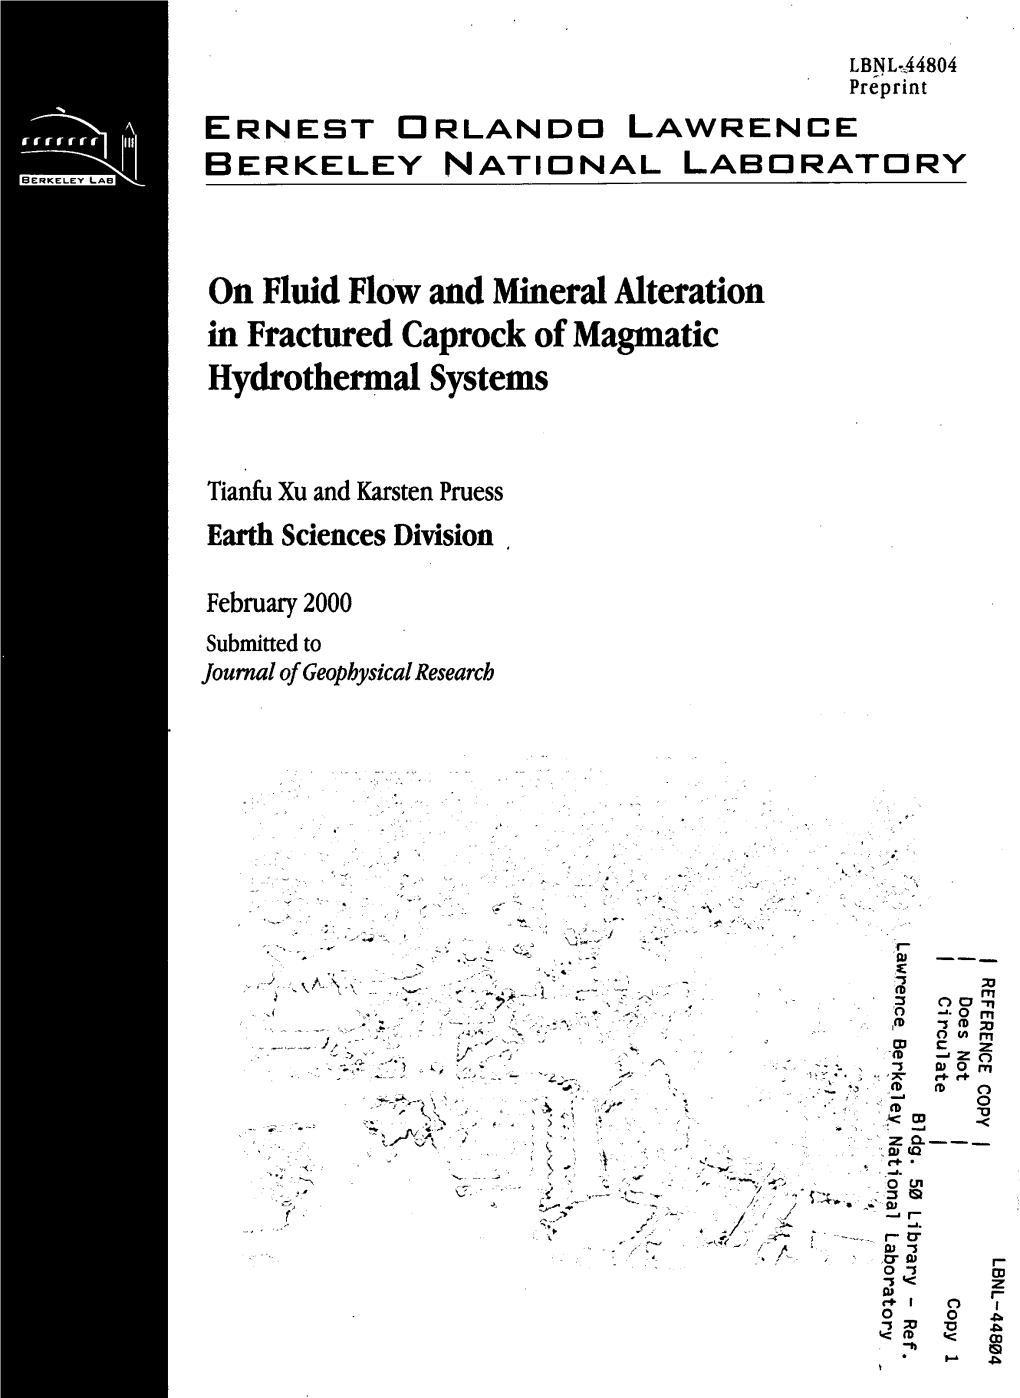 On Fluid Flow and Mineral Alteration in Fractured Caprock of Magmatic Hydrothennal Systems